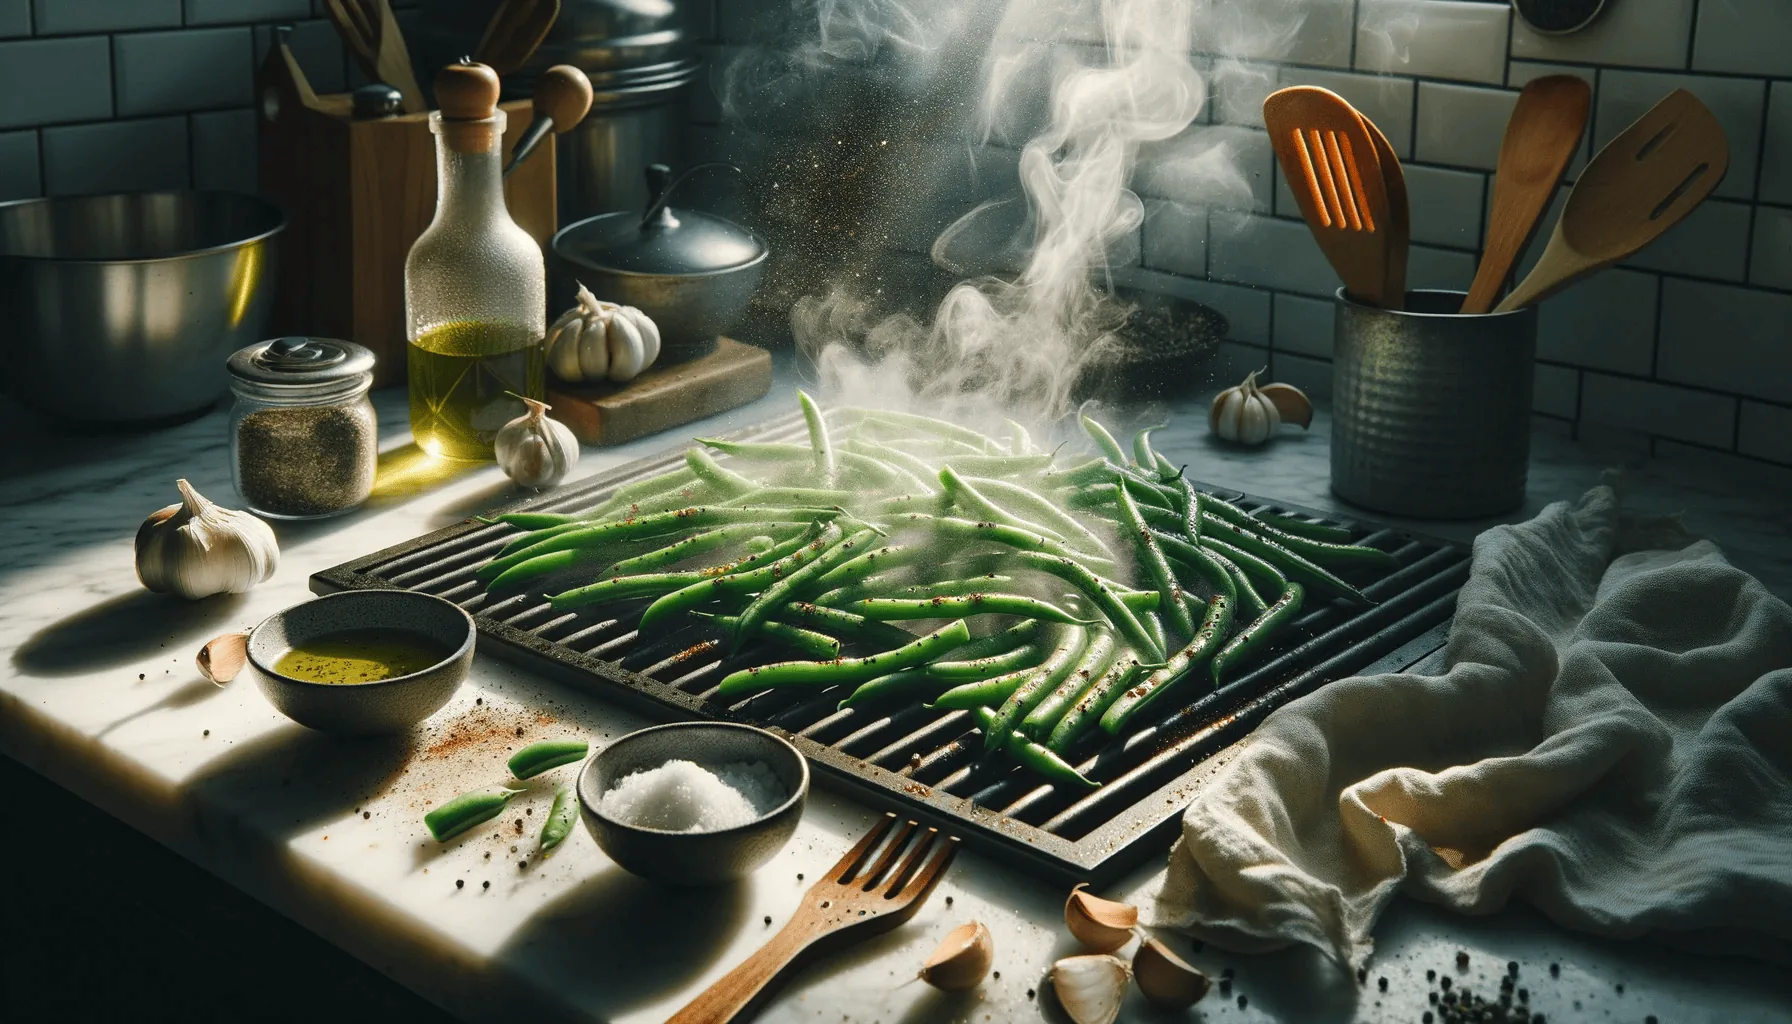 The making of grilled green beans recipe